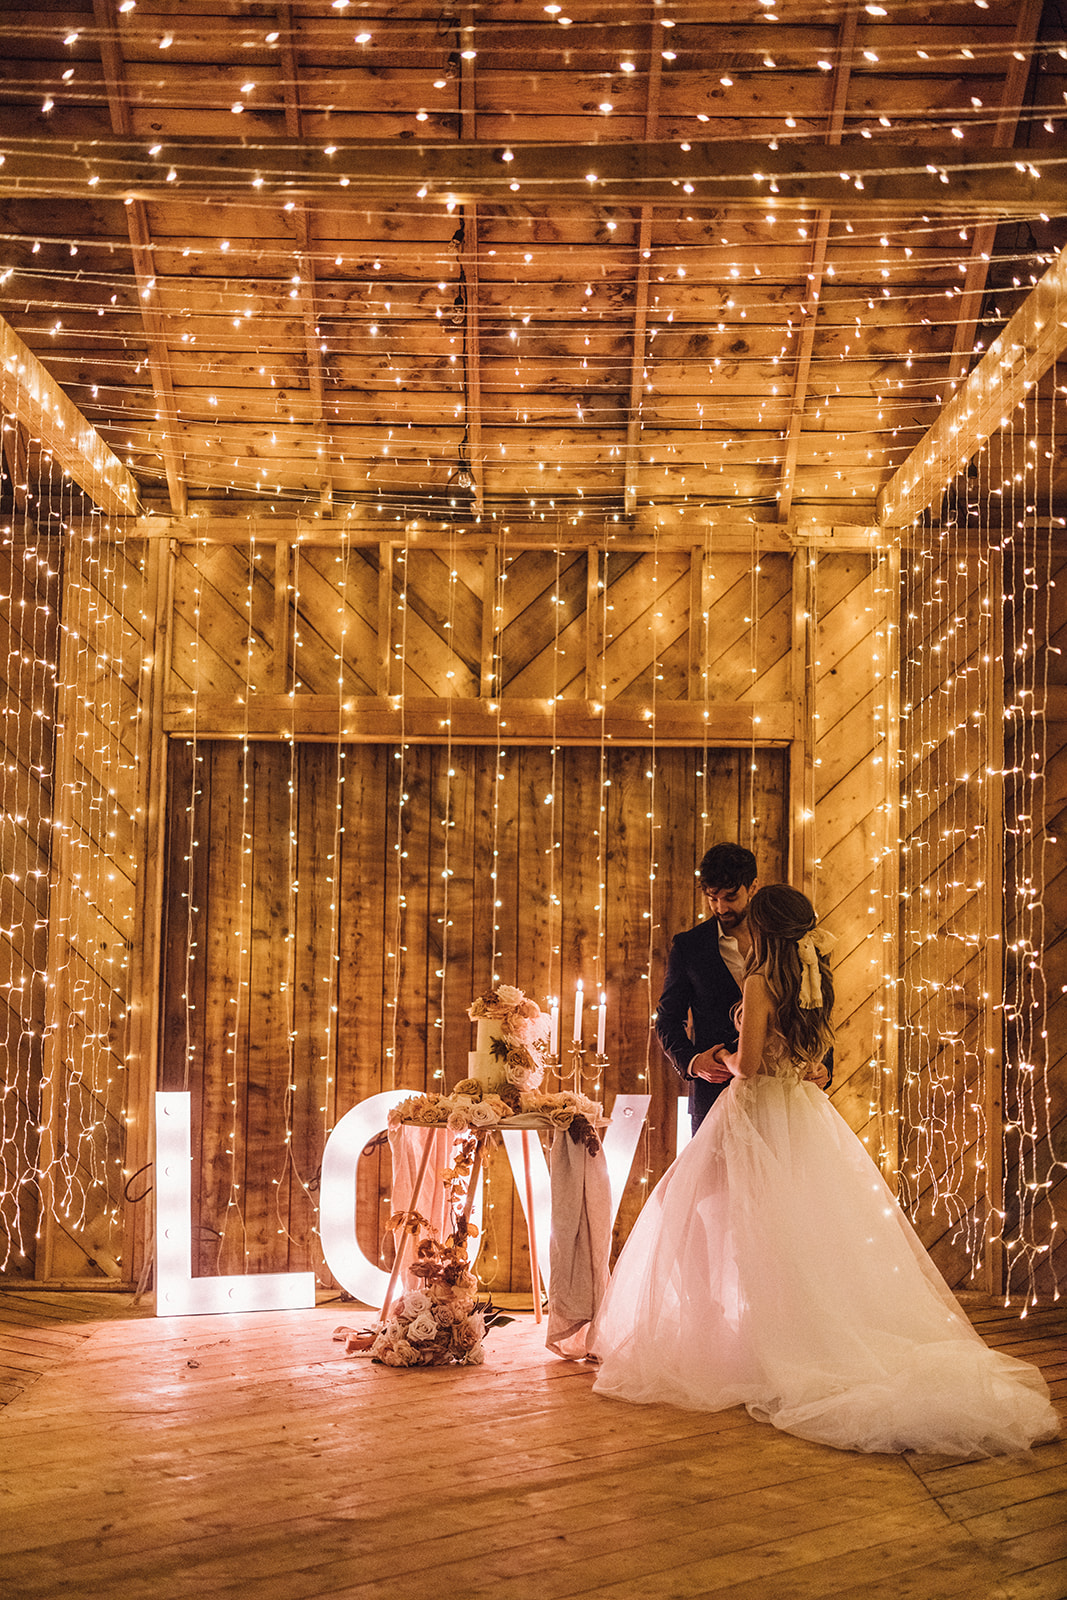 Pampas Grass, String Lights, and A Dramatic Sunset Ceremony Make This New Venue's Debut Feature More Than Memorable